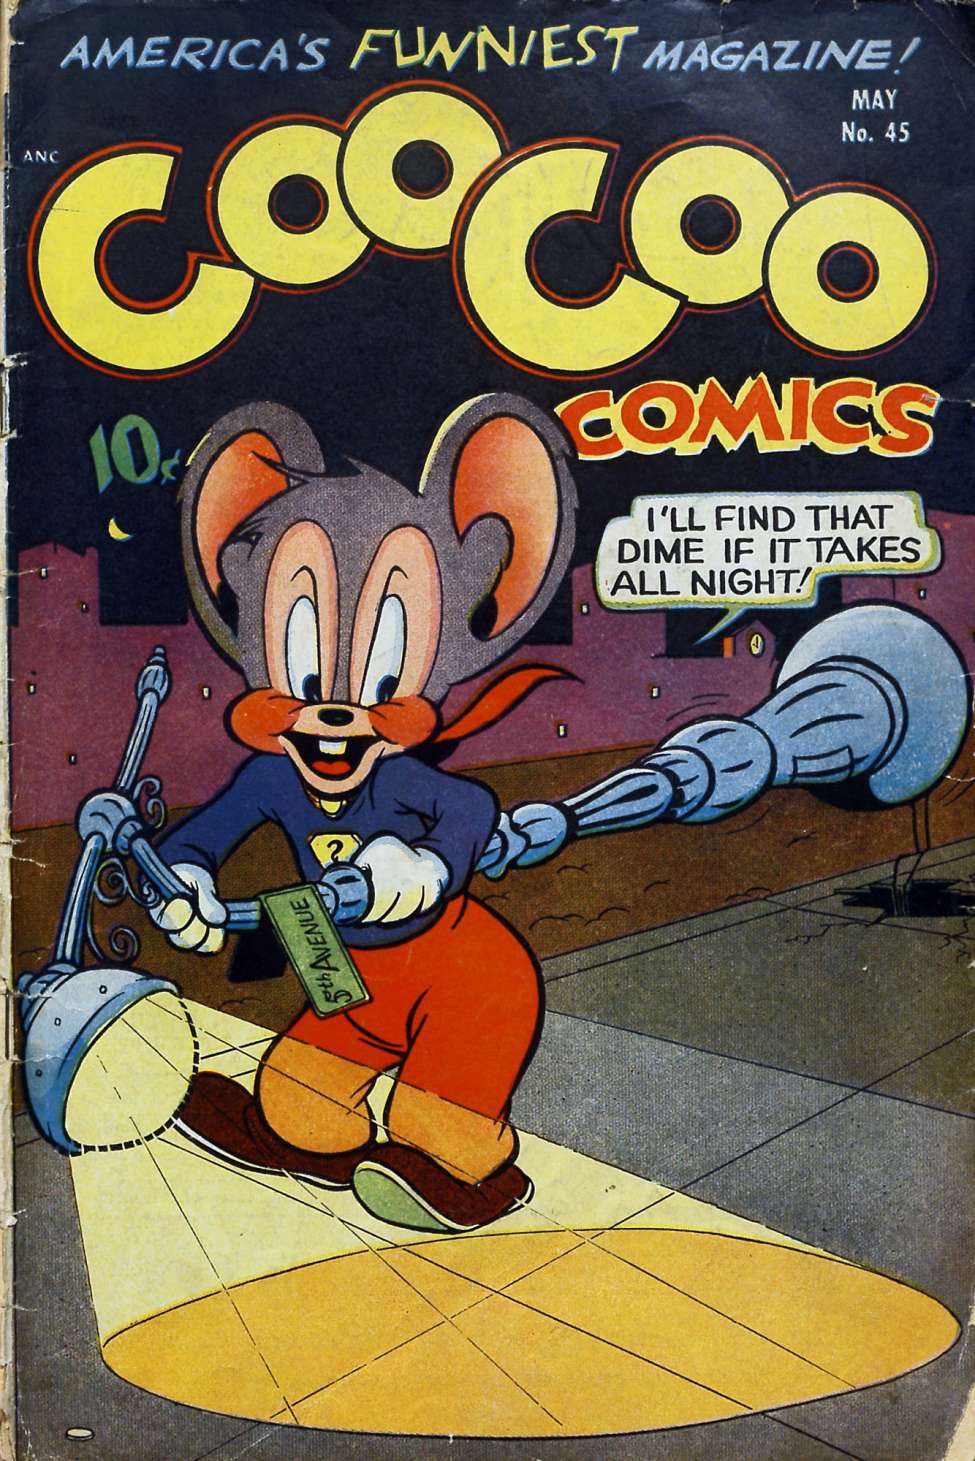 Book Cover For Coo Coo Comics 45